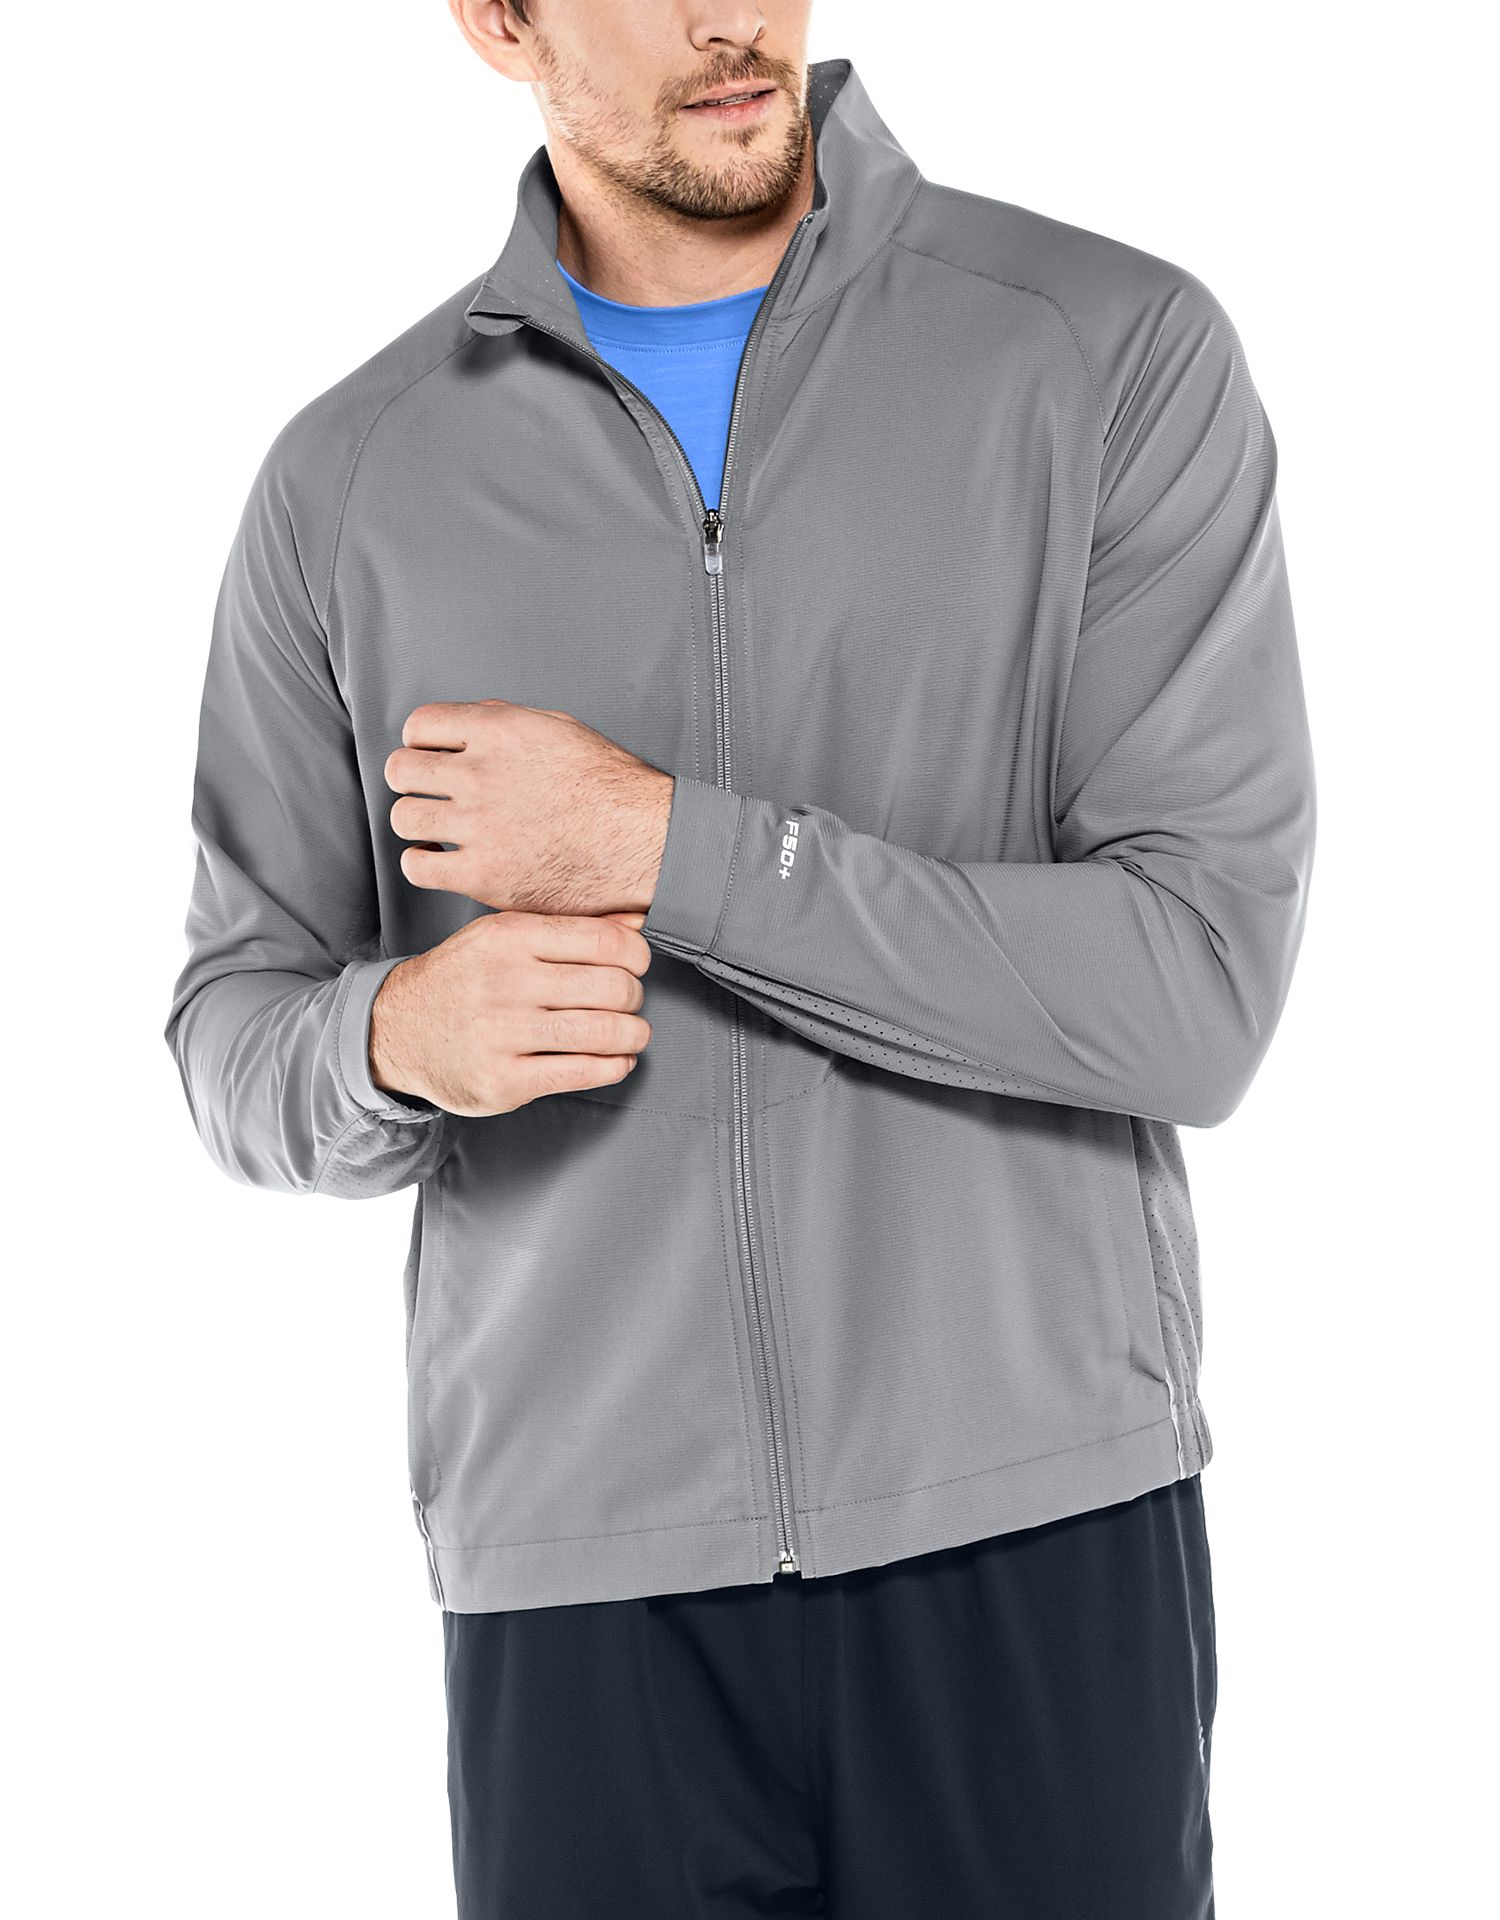 Coolibar - UV Sport Jacket for men - Outspace - Iron